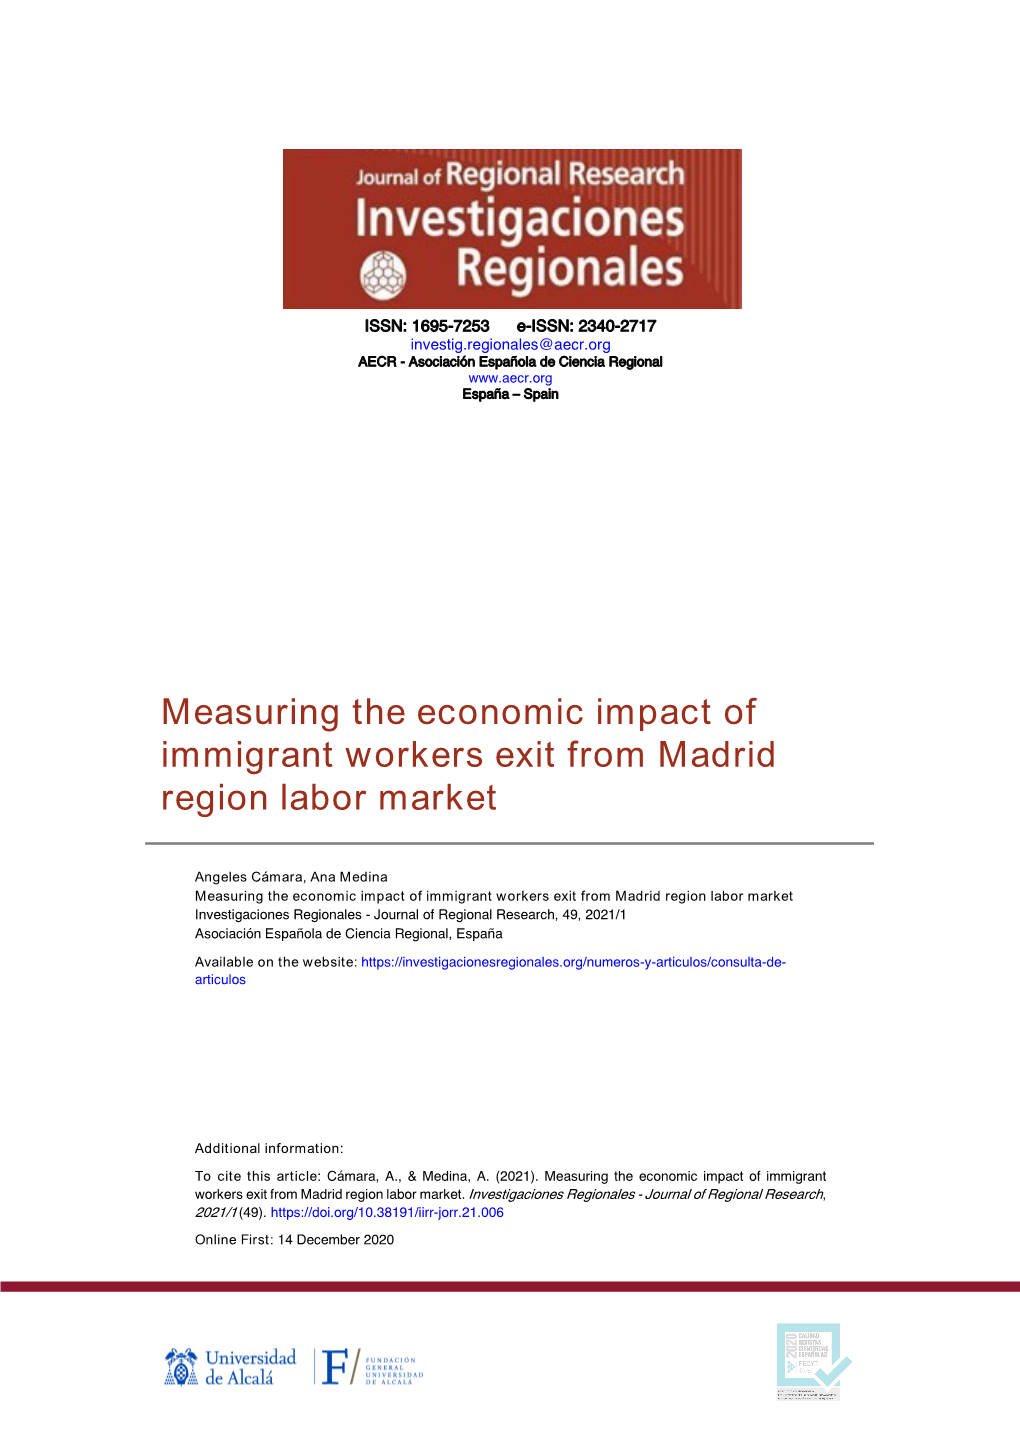 Measuring the Economic Impact of Immigrant Workers Exit from Madrid Region Labor Market